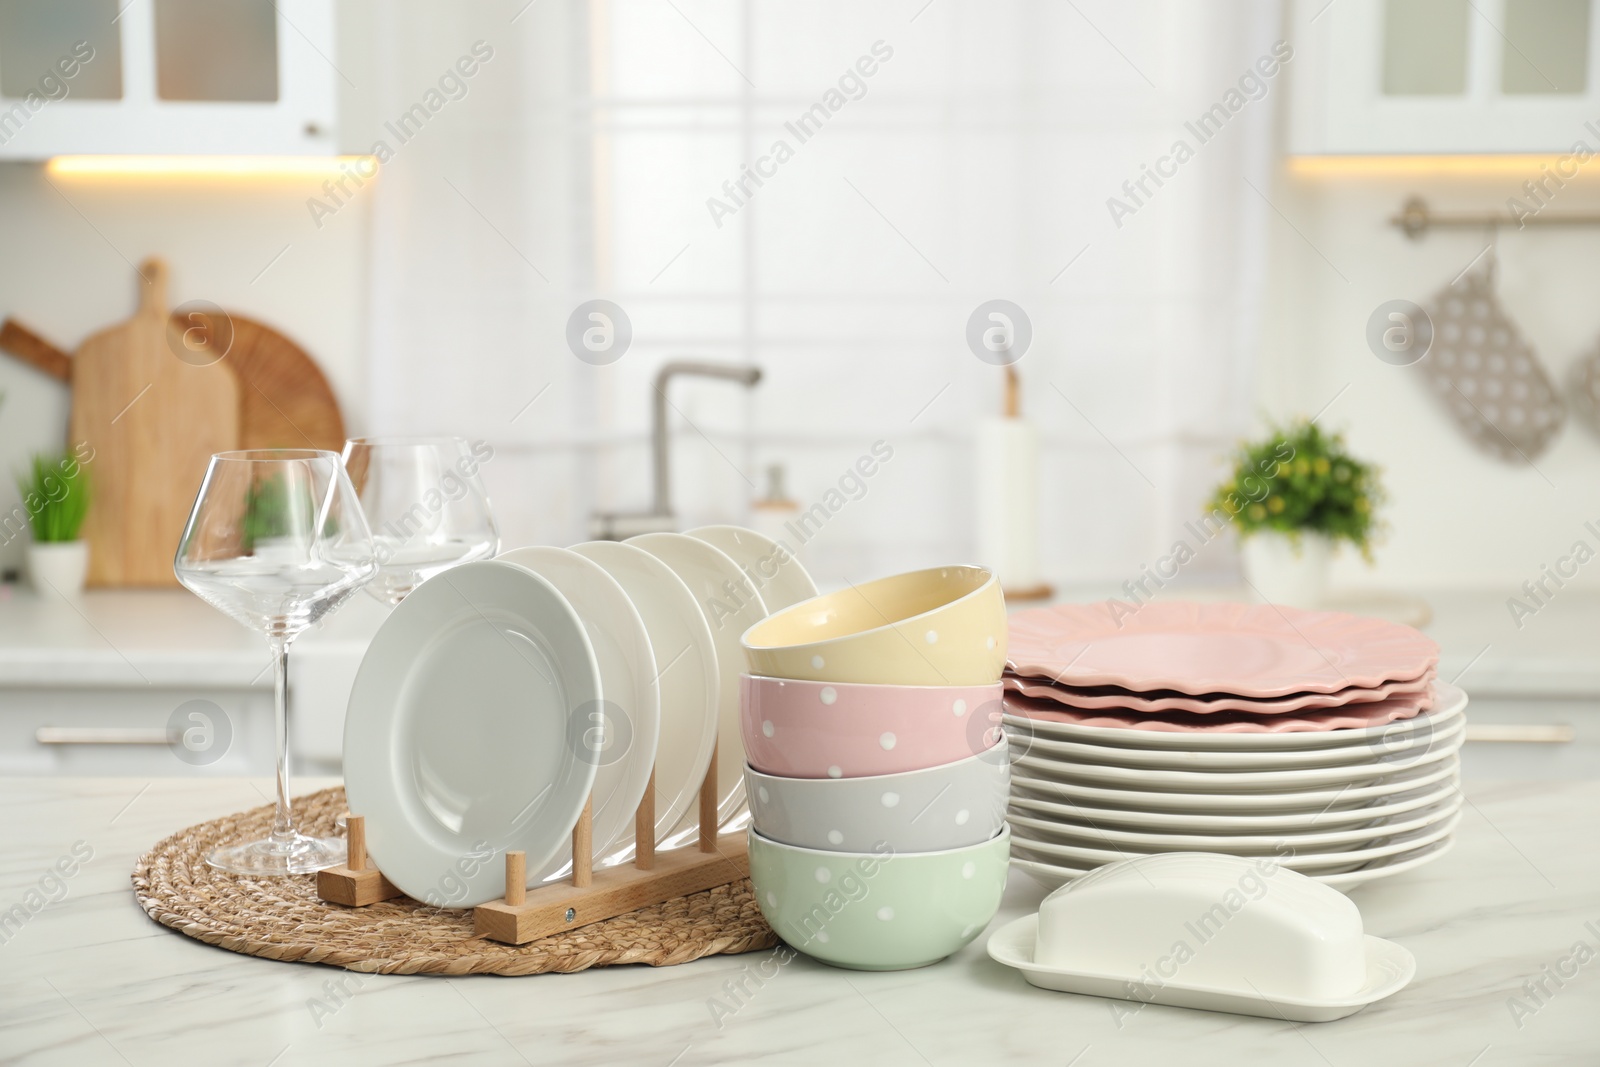 Photo of Clean plates, bowls, butter dish and glasses on white marble table in kitchen